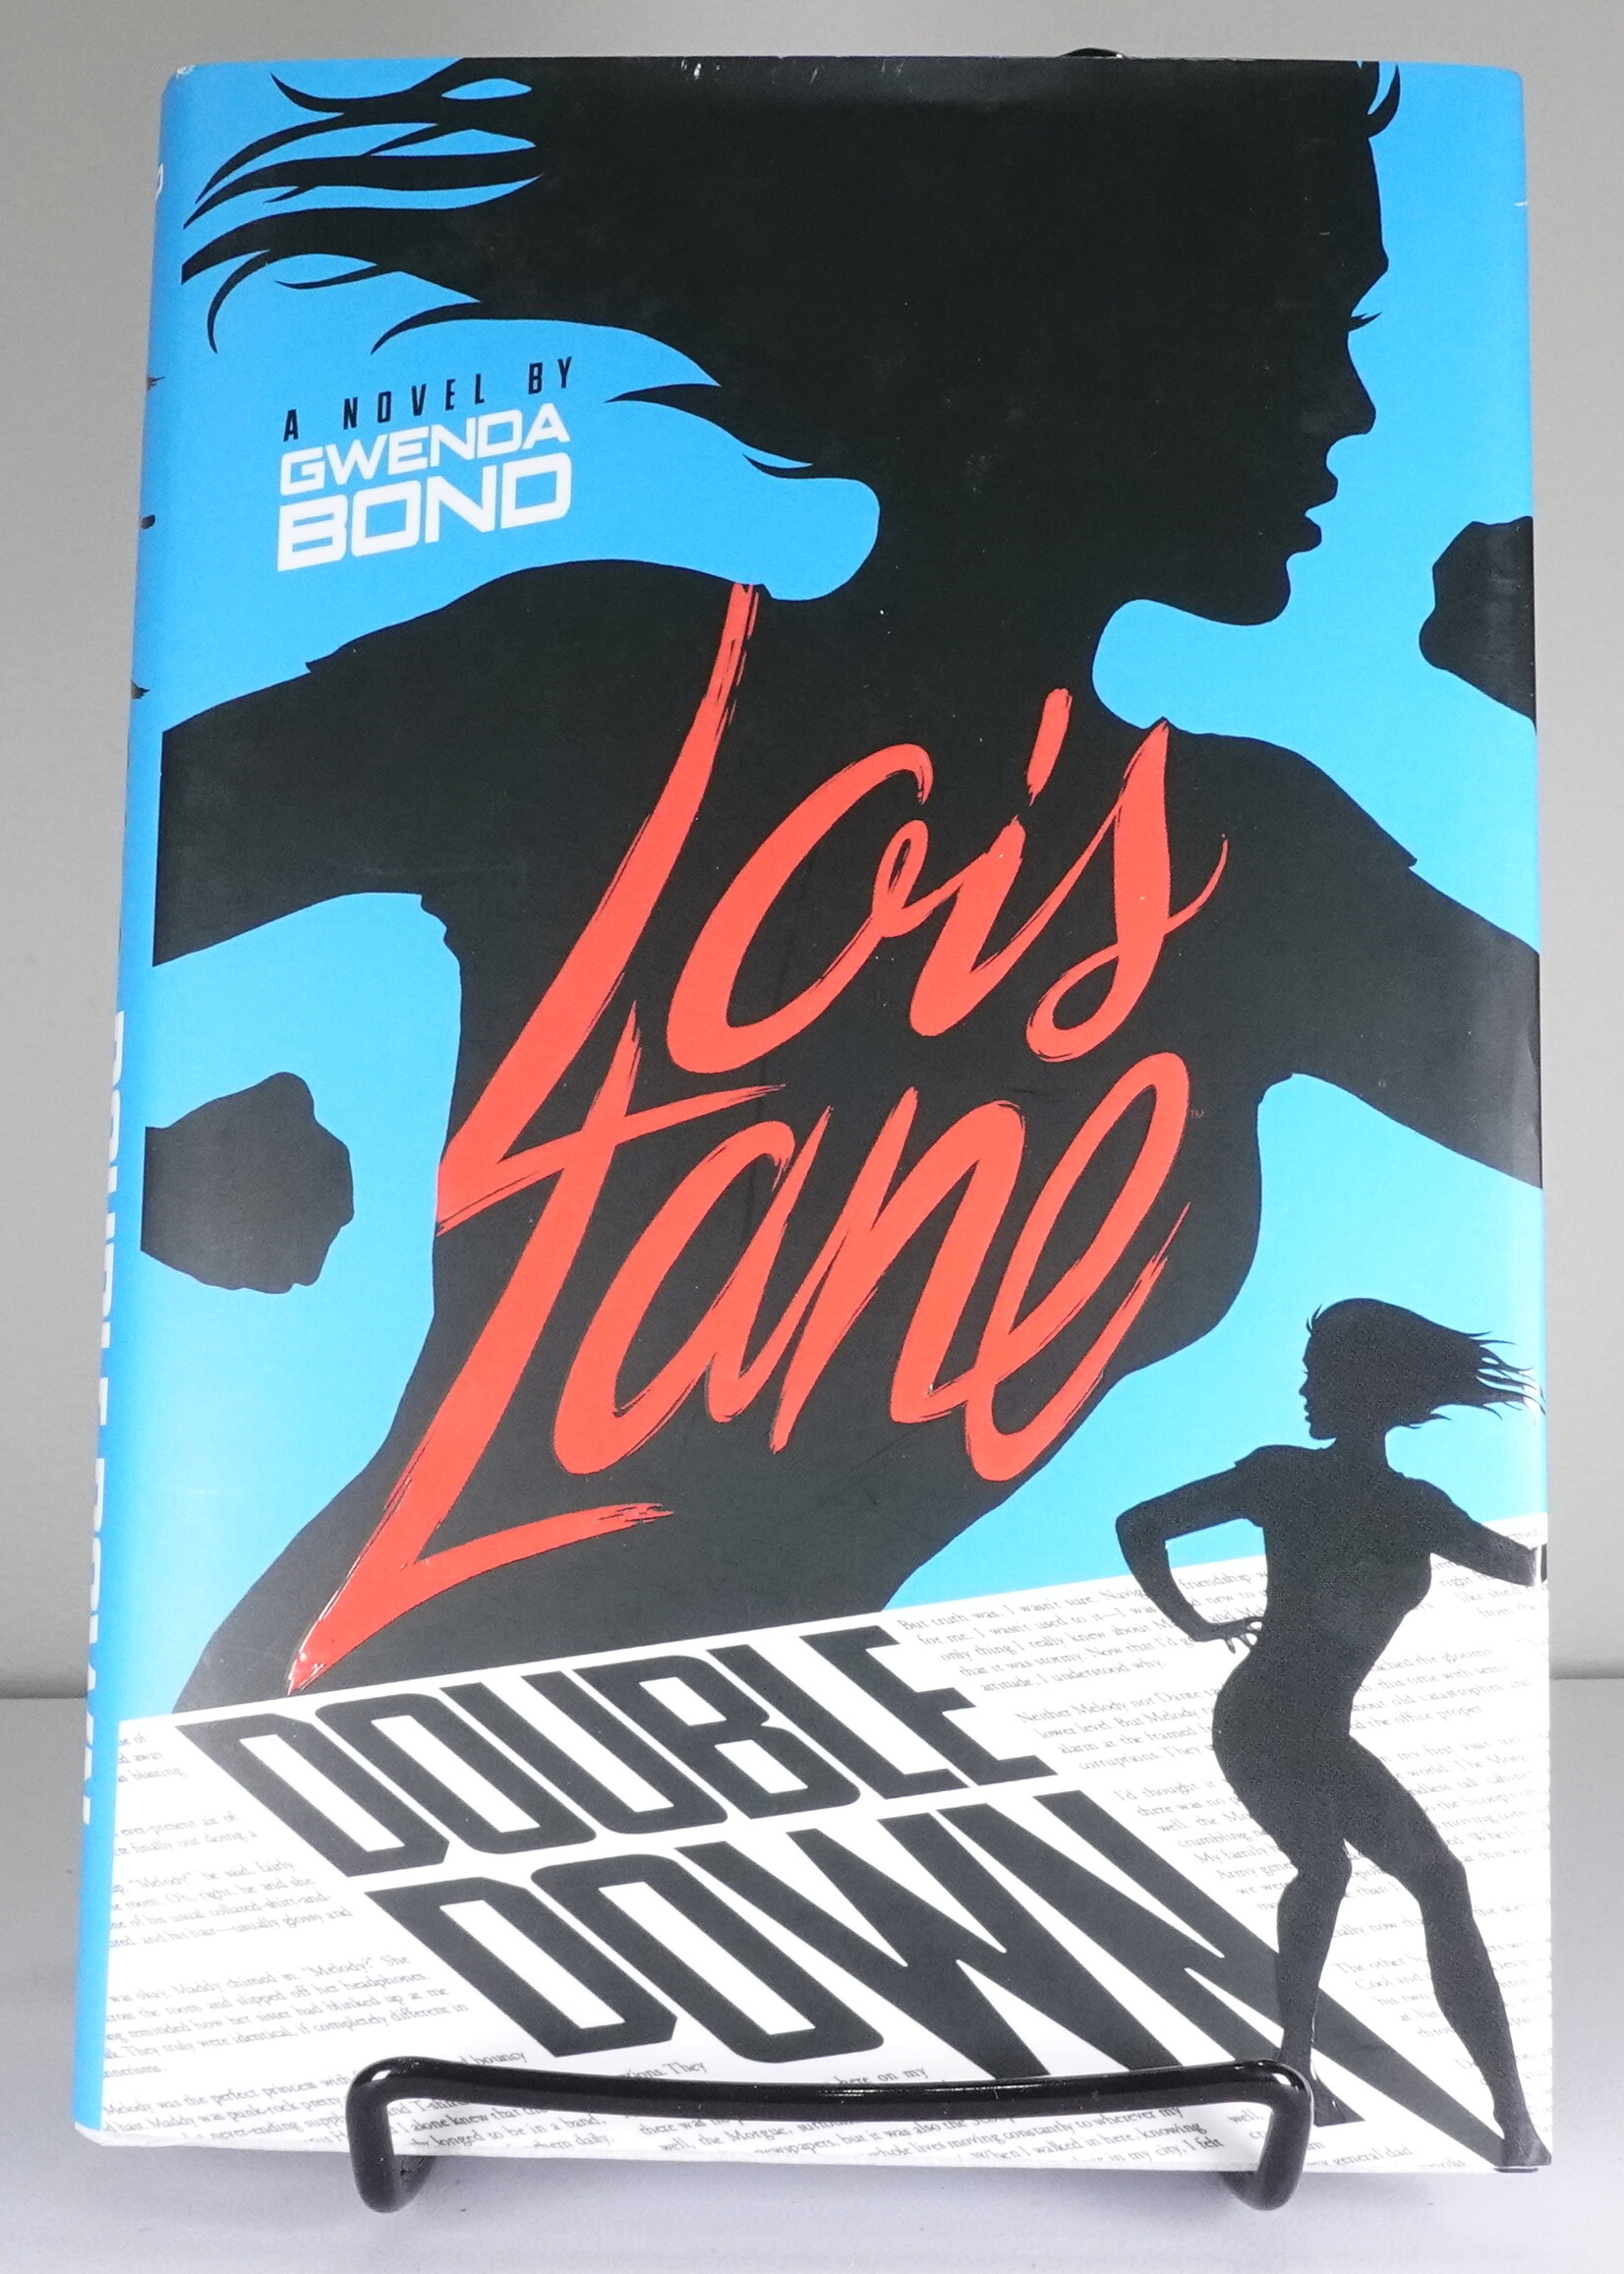 Switch Press Double Down (Book #2 in the Lois Lane Series)